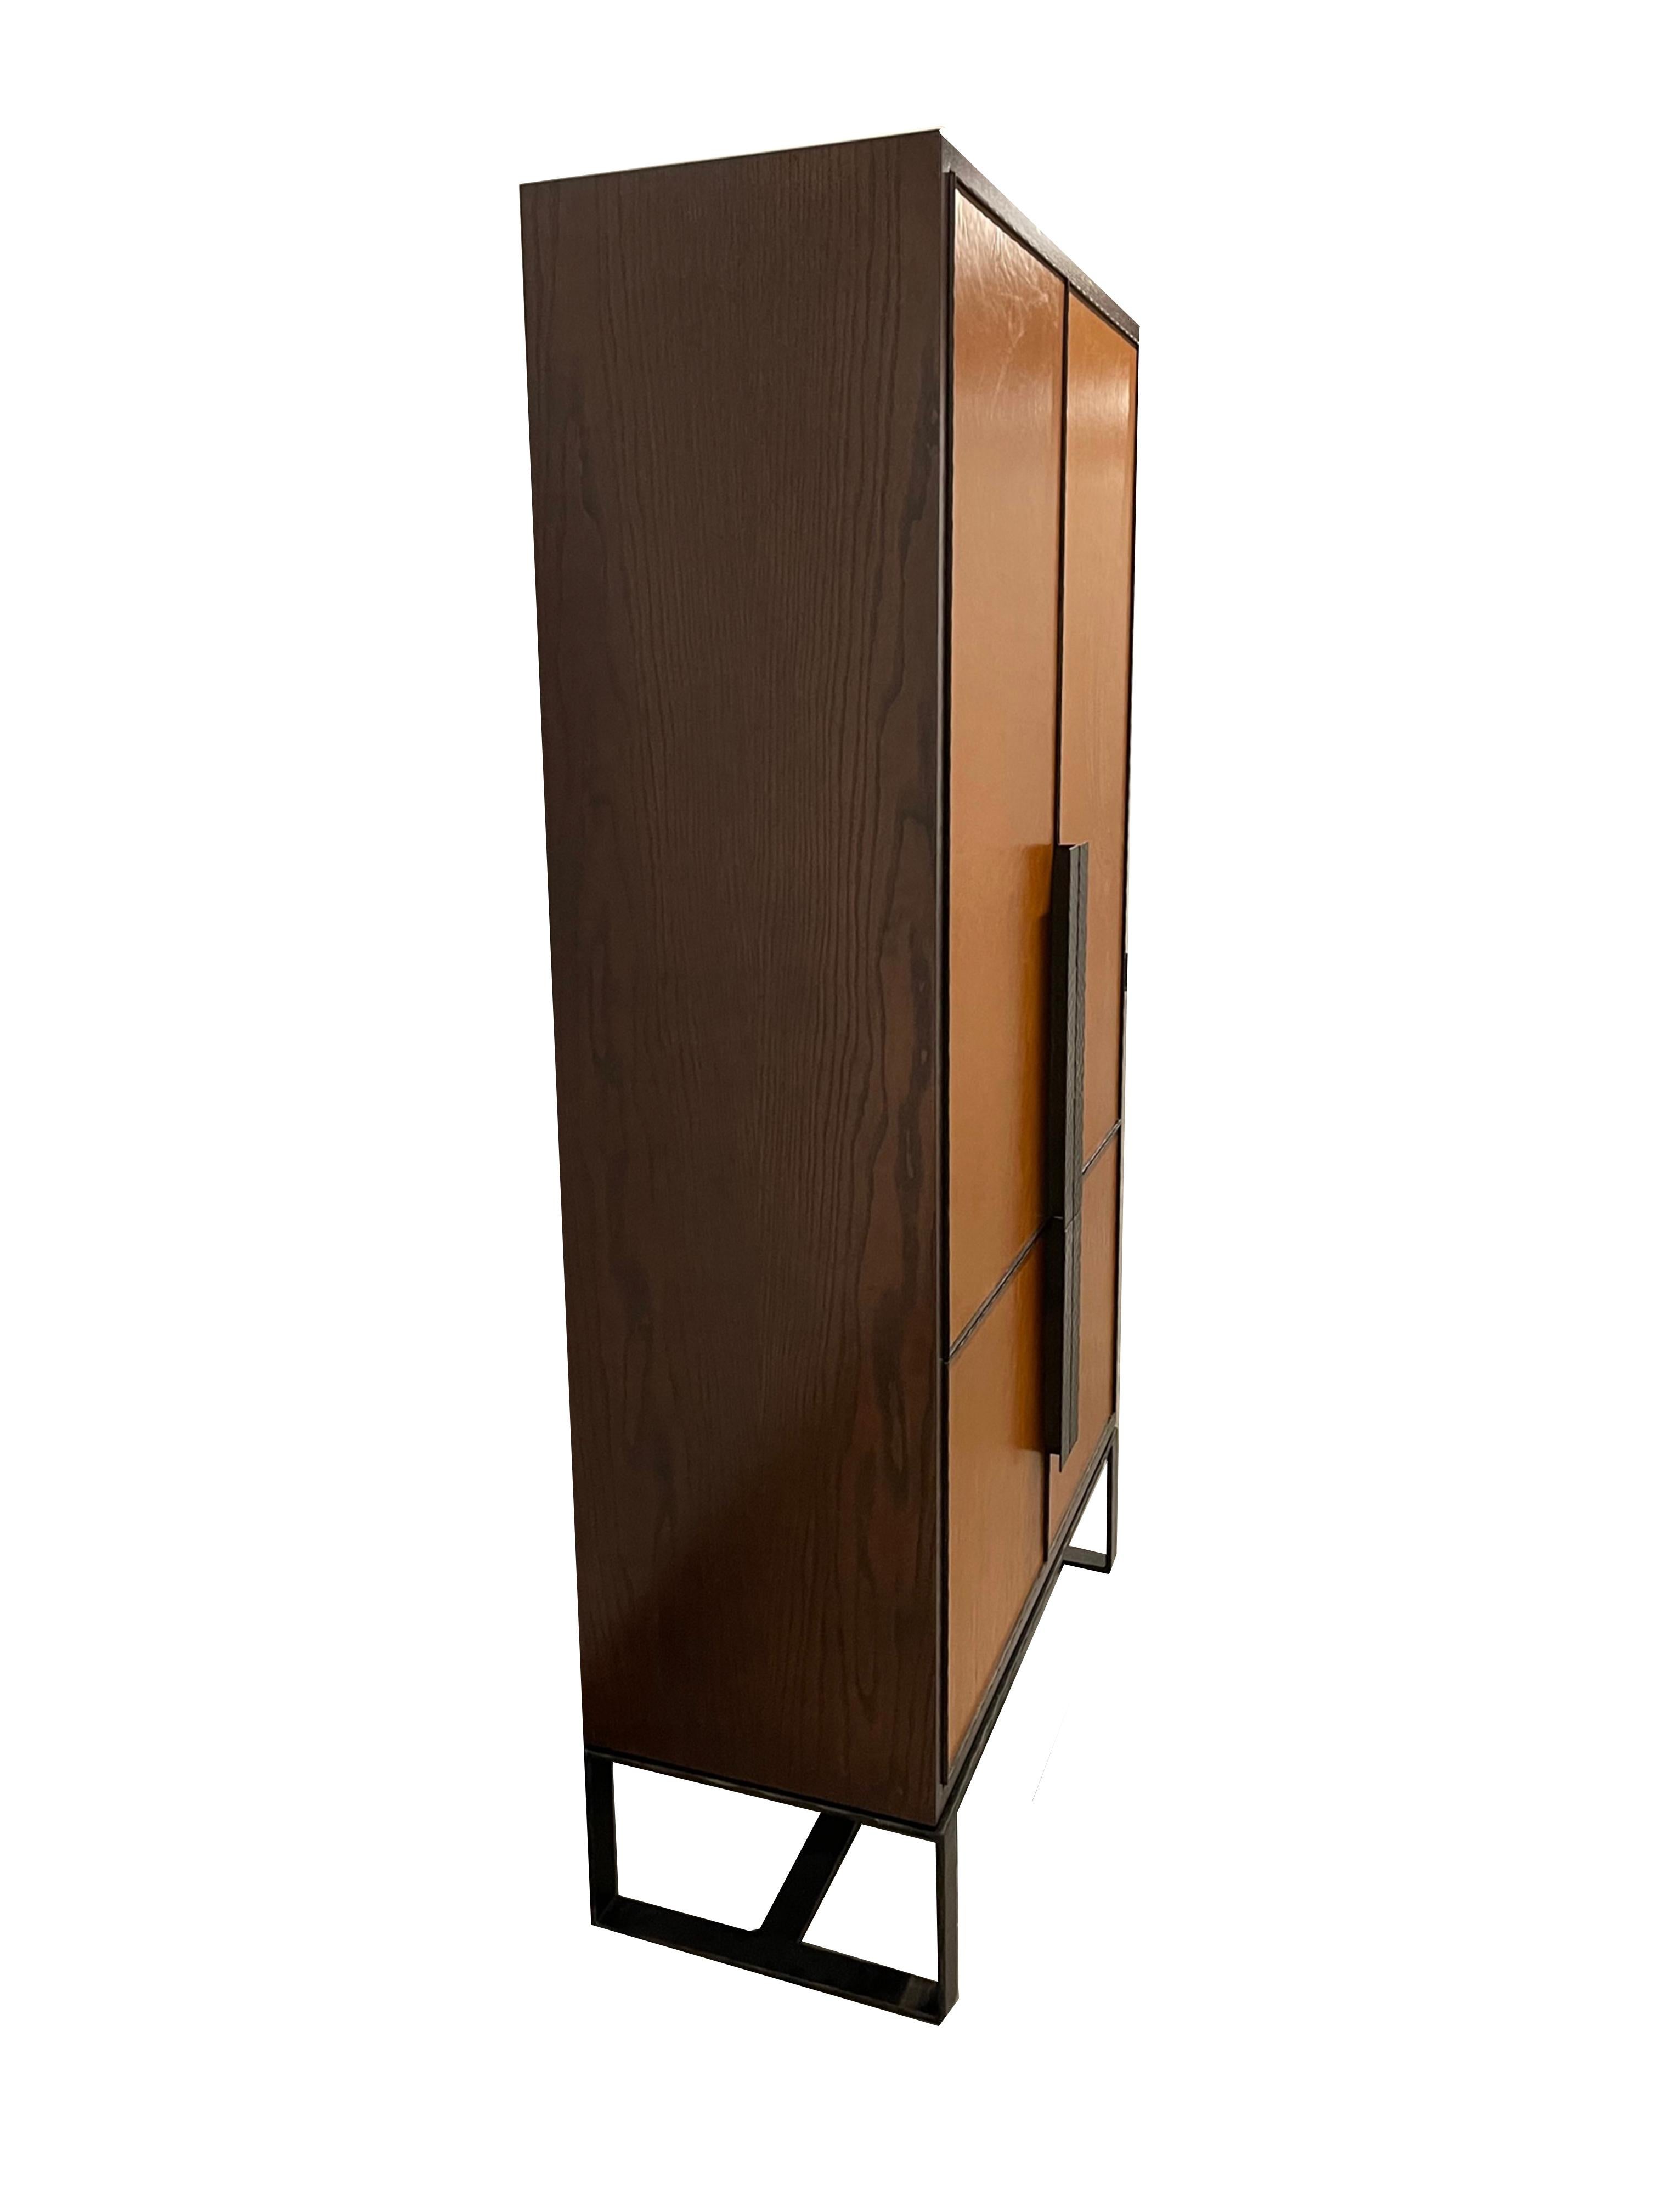 The Chelsea leather bar cabinet by Ercole Home is a 4 door metal framed Bar / serving area. This piece is equipped with two compartments, in the larger of the two is the main bar area consisting of four drawers for storage, a touch latch shelf, and